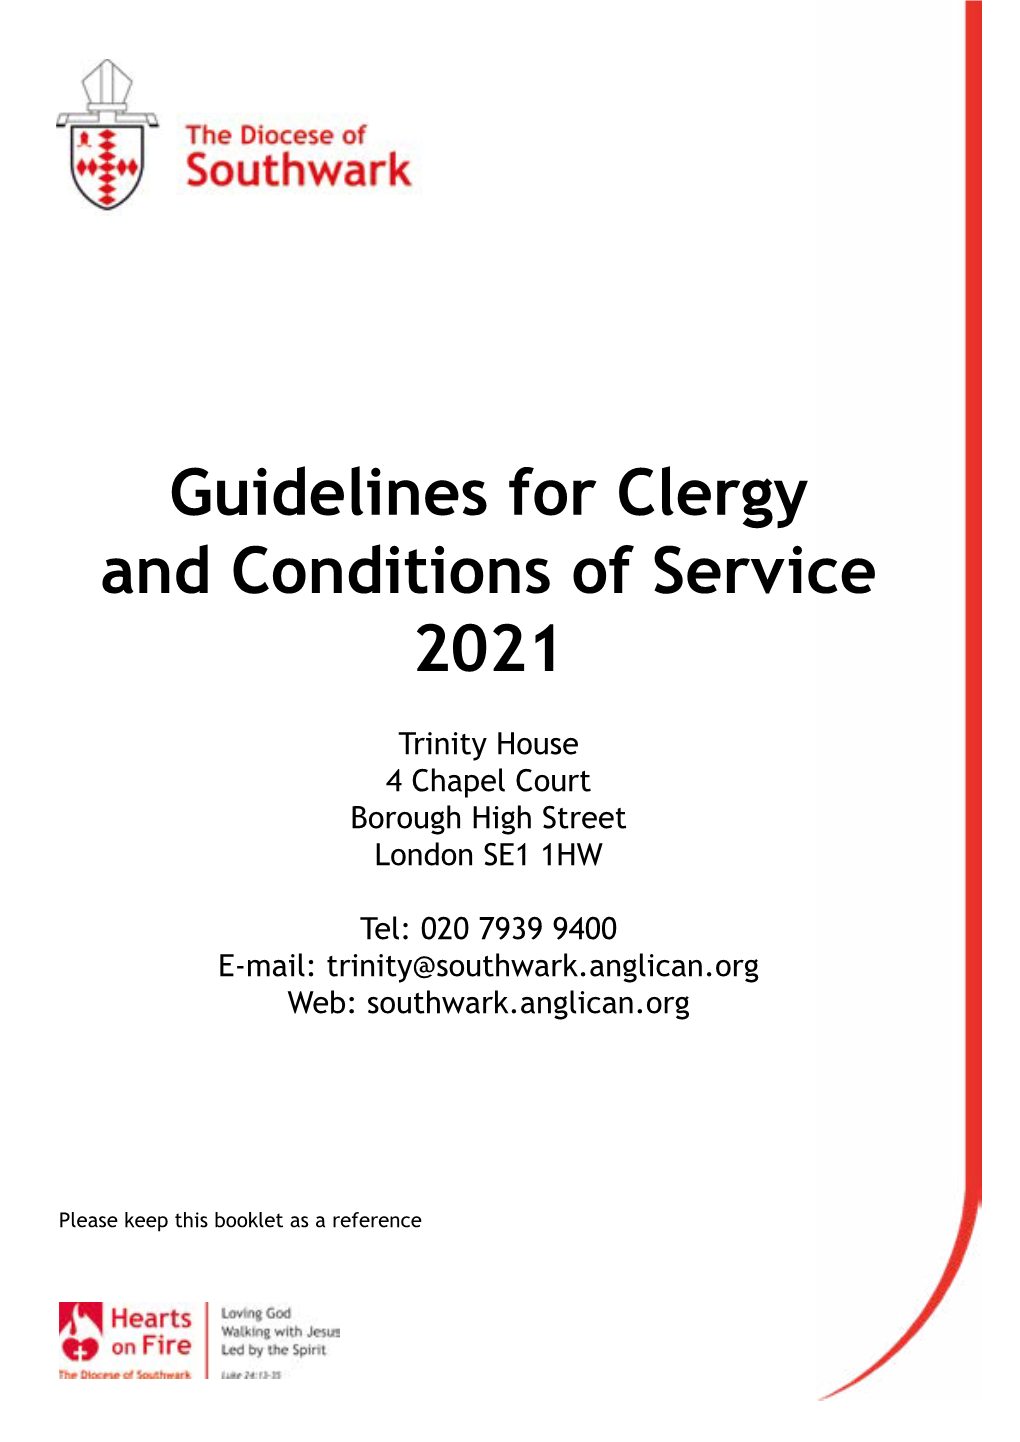 Guidelines for Clergy and Conditions of Service 2021